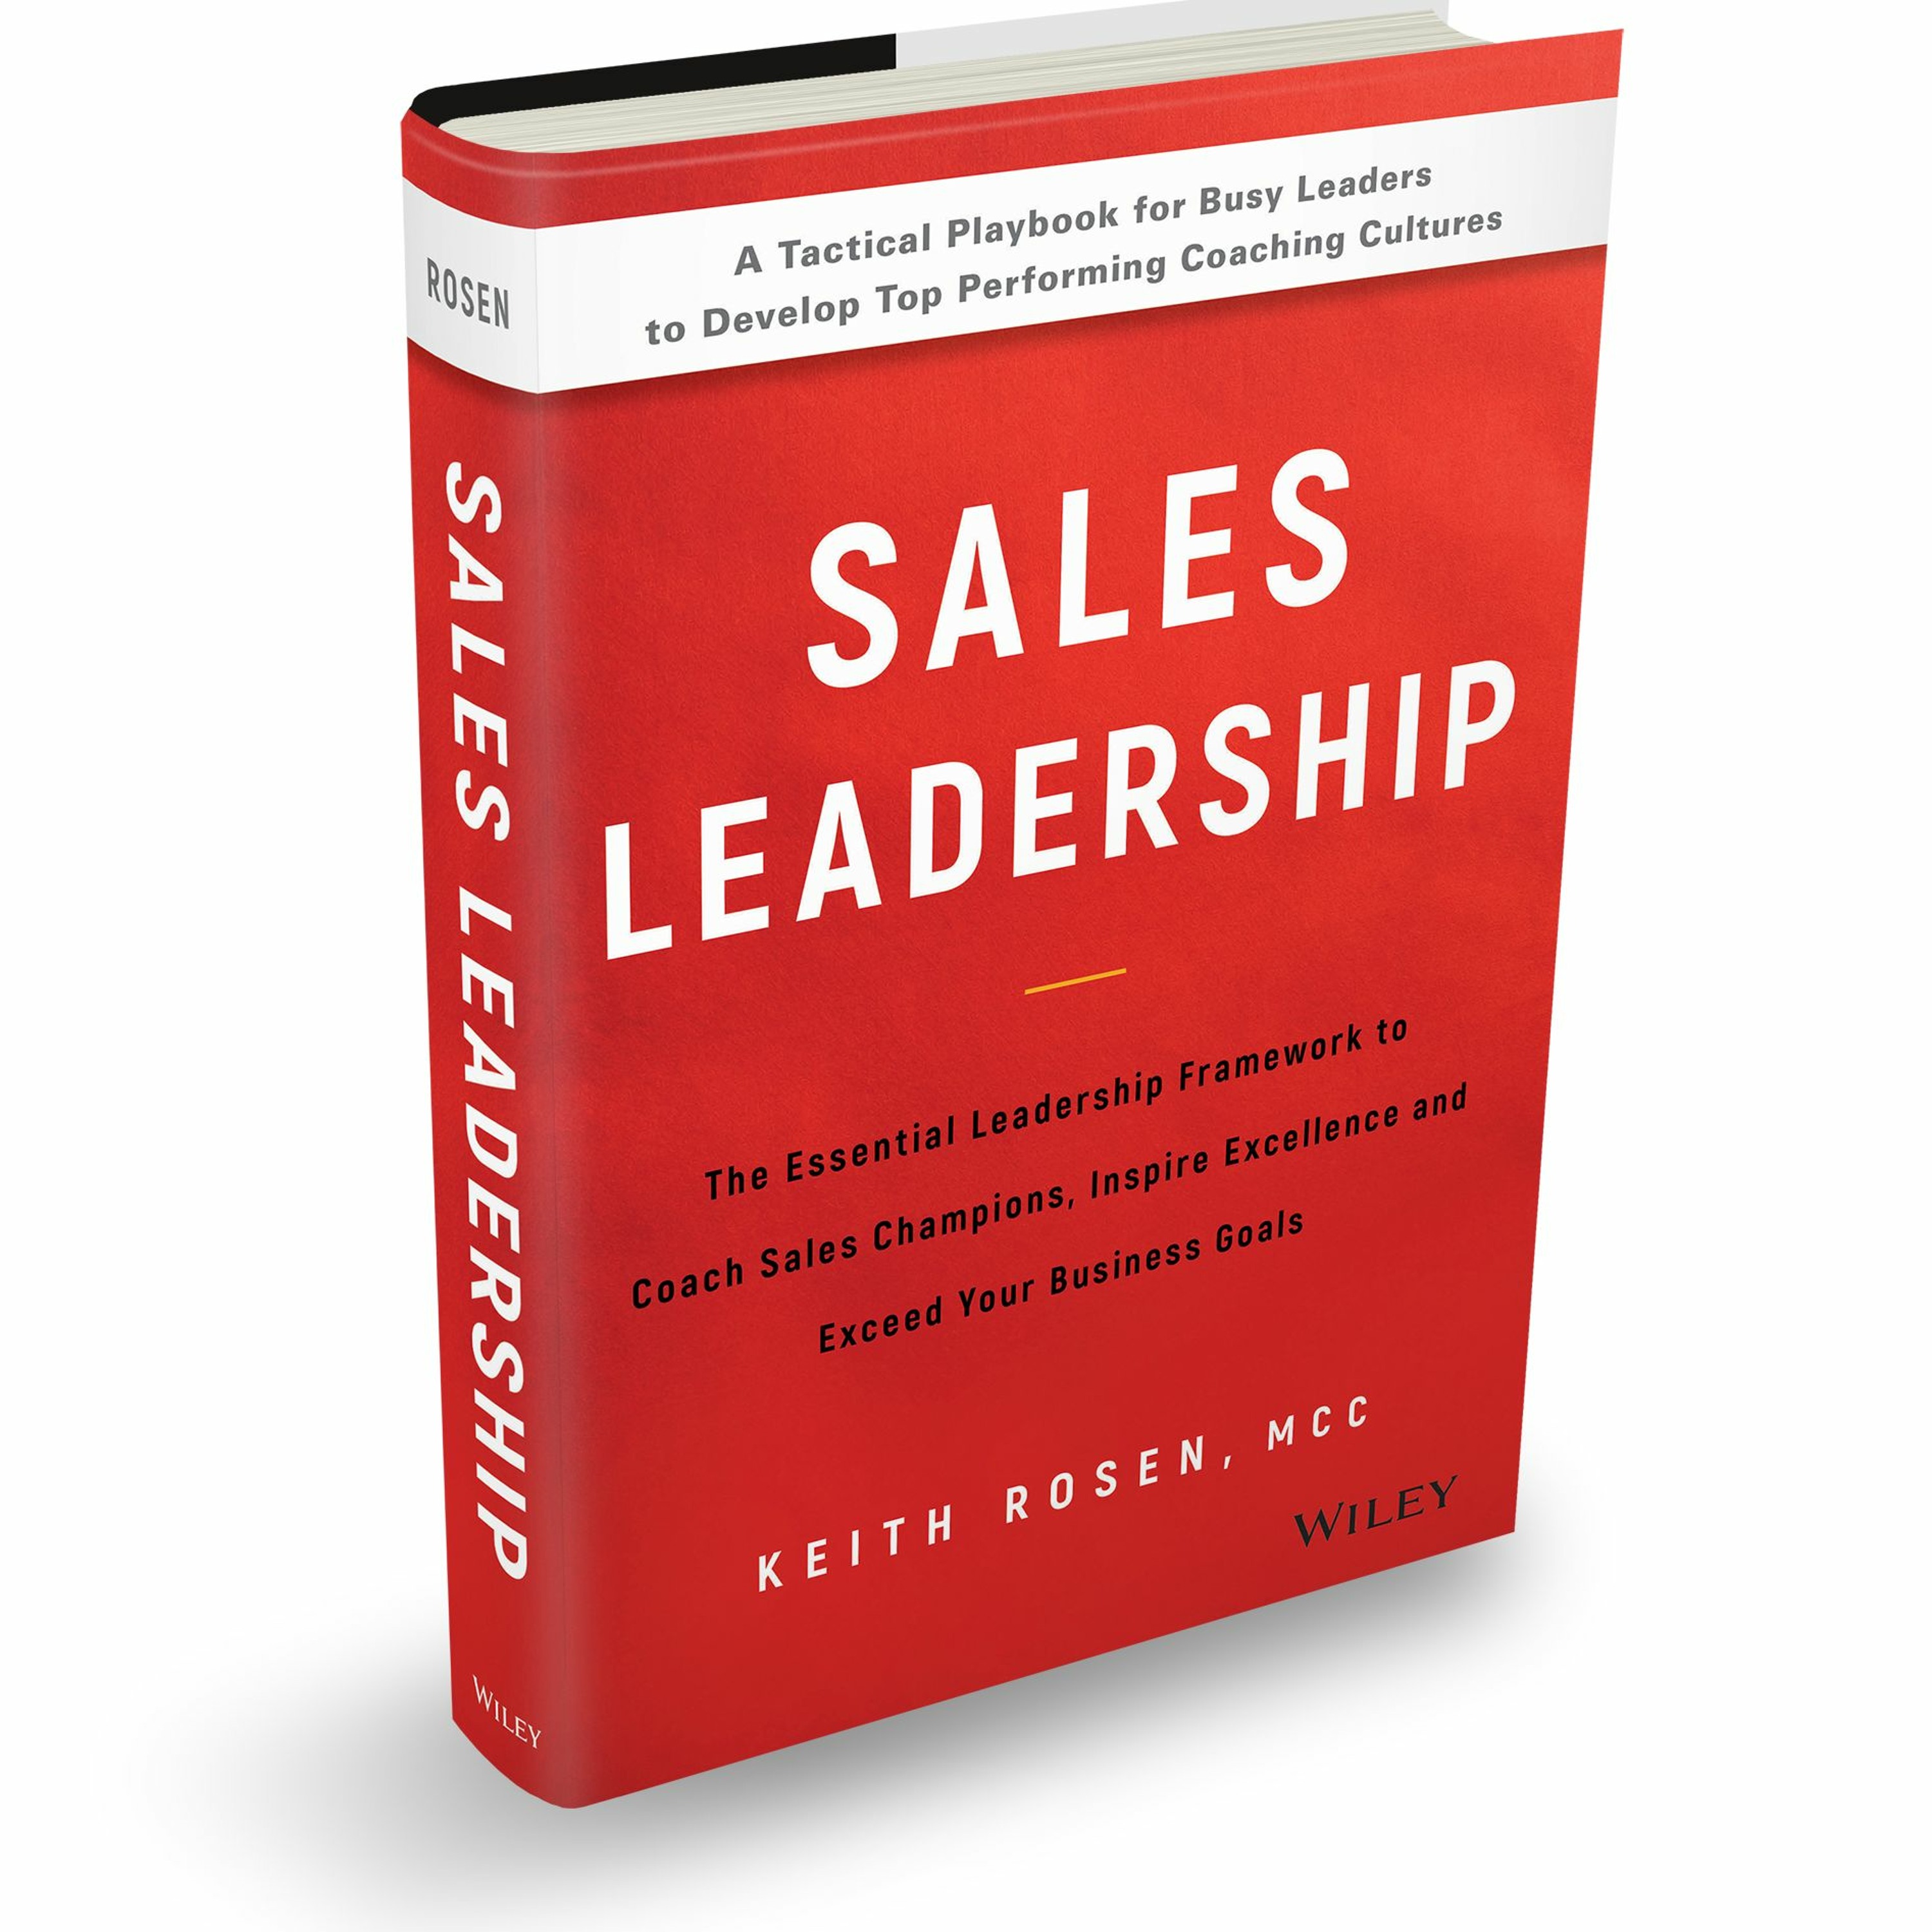 SALES LEADERSHIP Book Club Discussion: Episode 5 - Interview with Keith Rosen Live Q & A